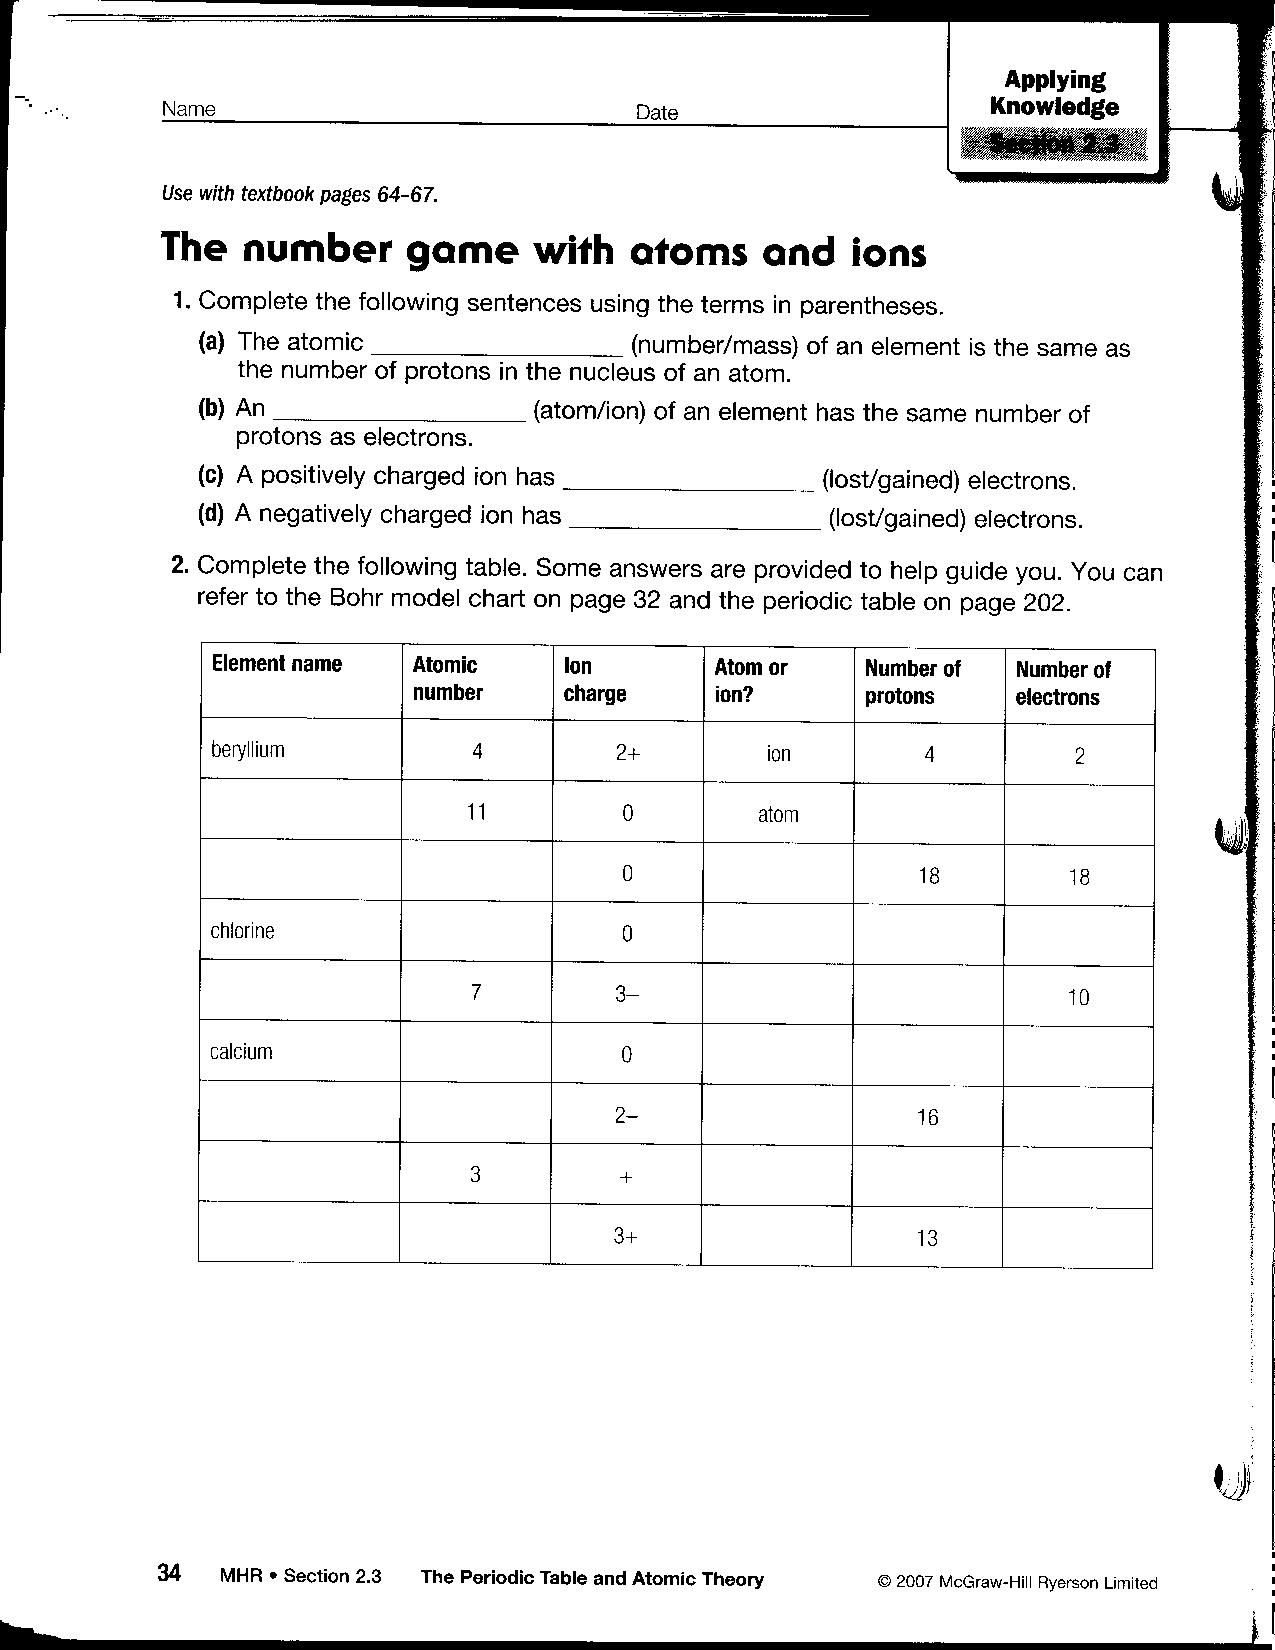 Isotopes and Ions Practice Worksheet Answers Image